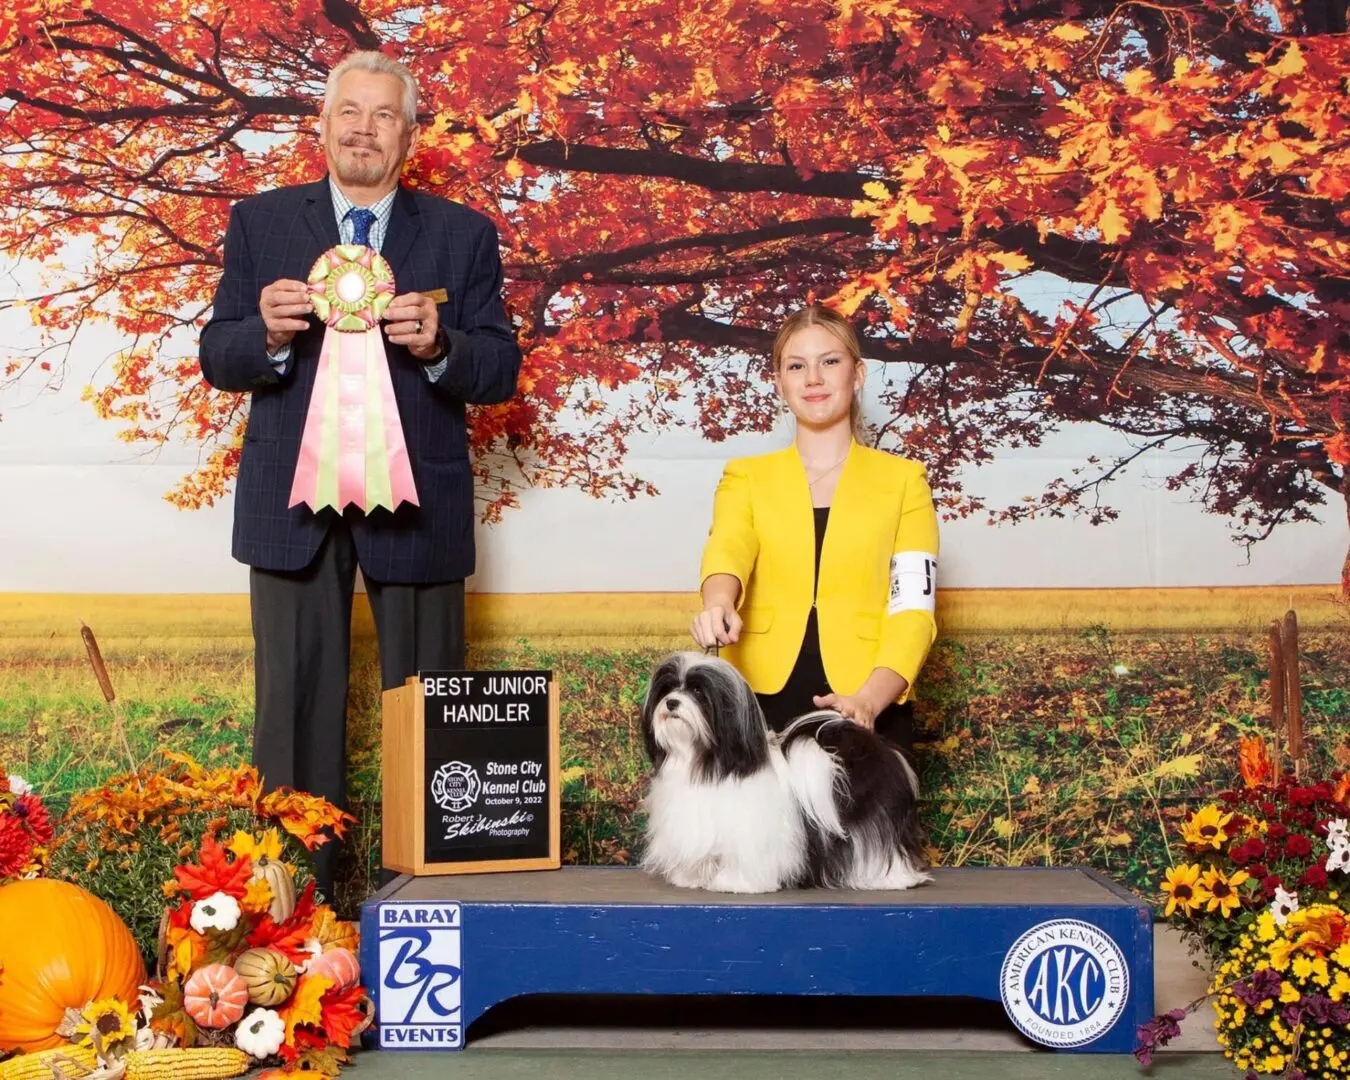 A man and woman standing next to a shih tzu puppy.